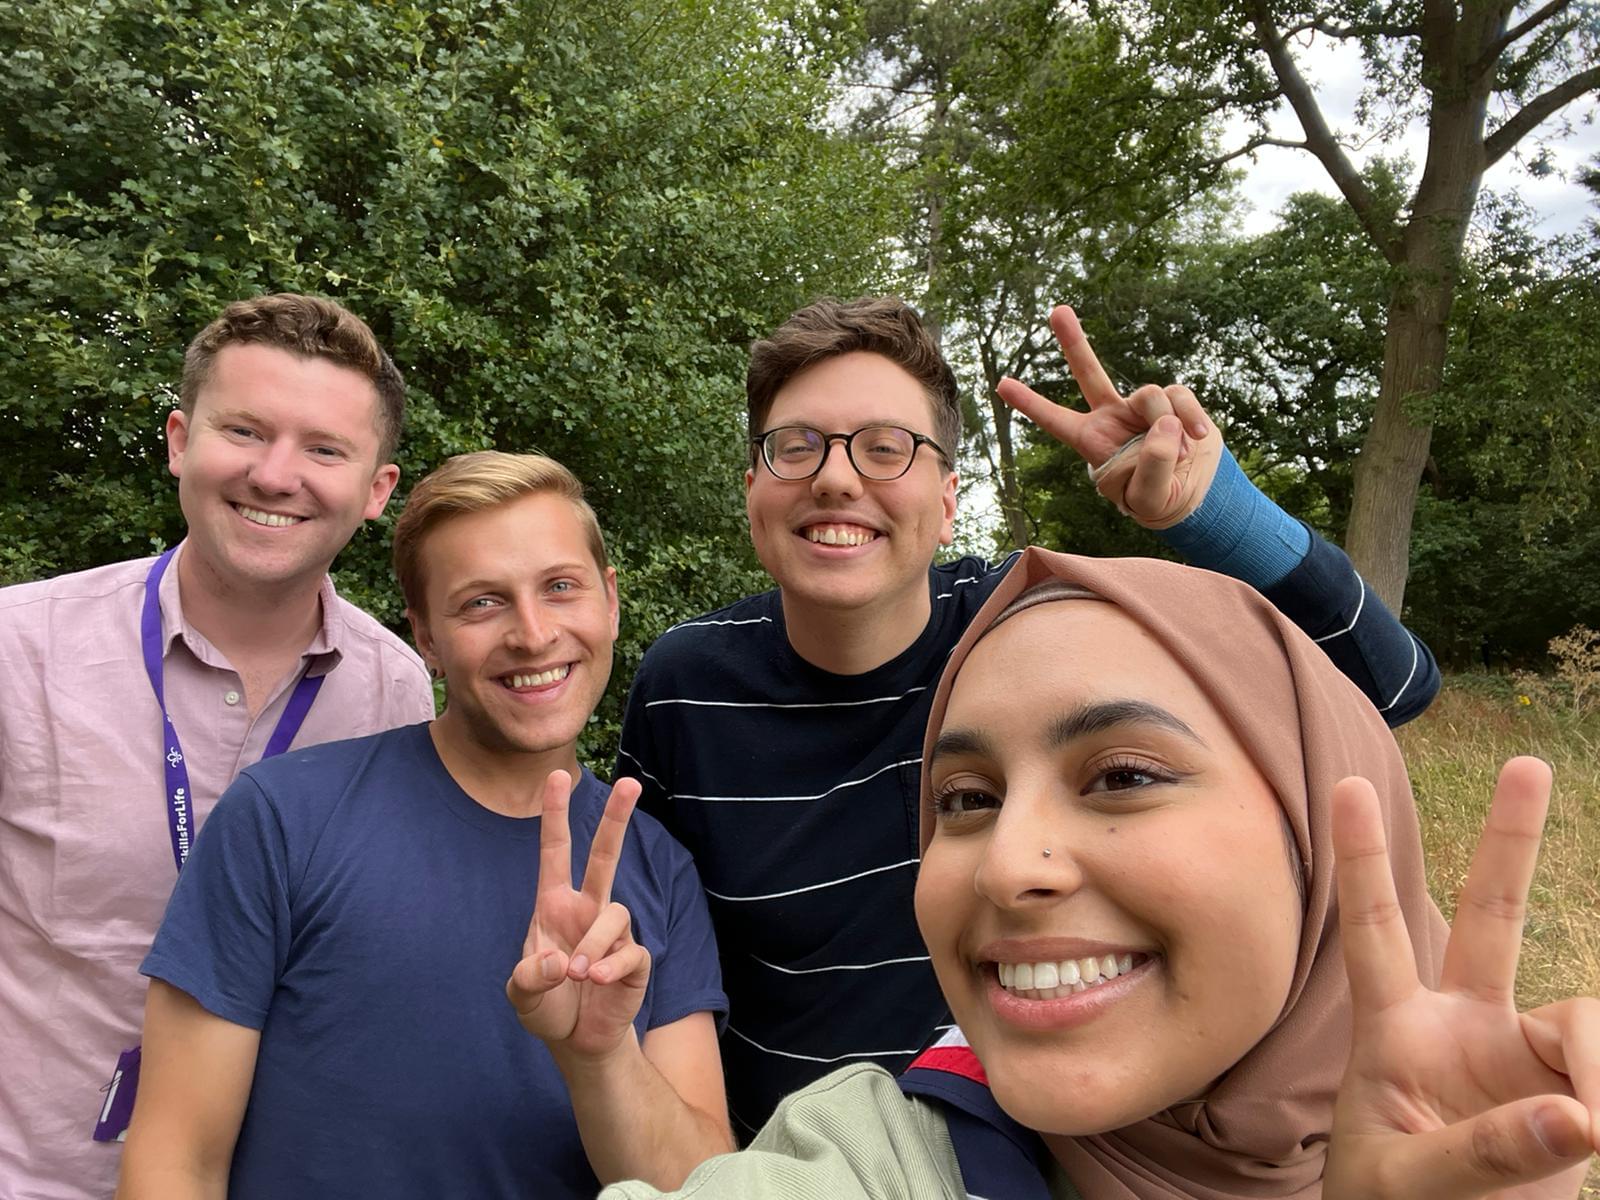 Ayesha and our youth commissioners have taken a selfie. They are all smiling and are showing peace signs with their hands.